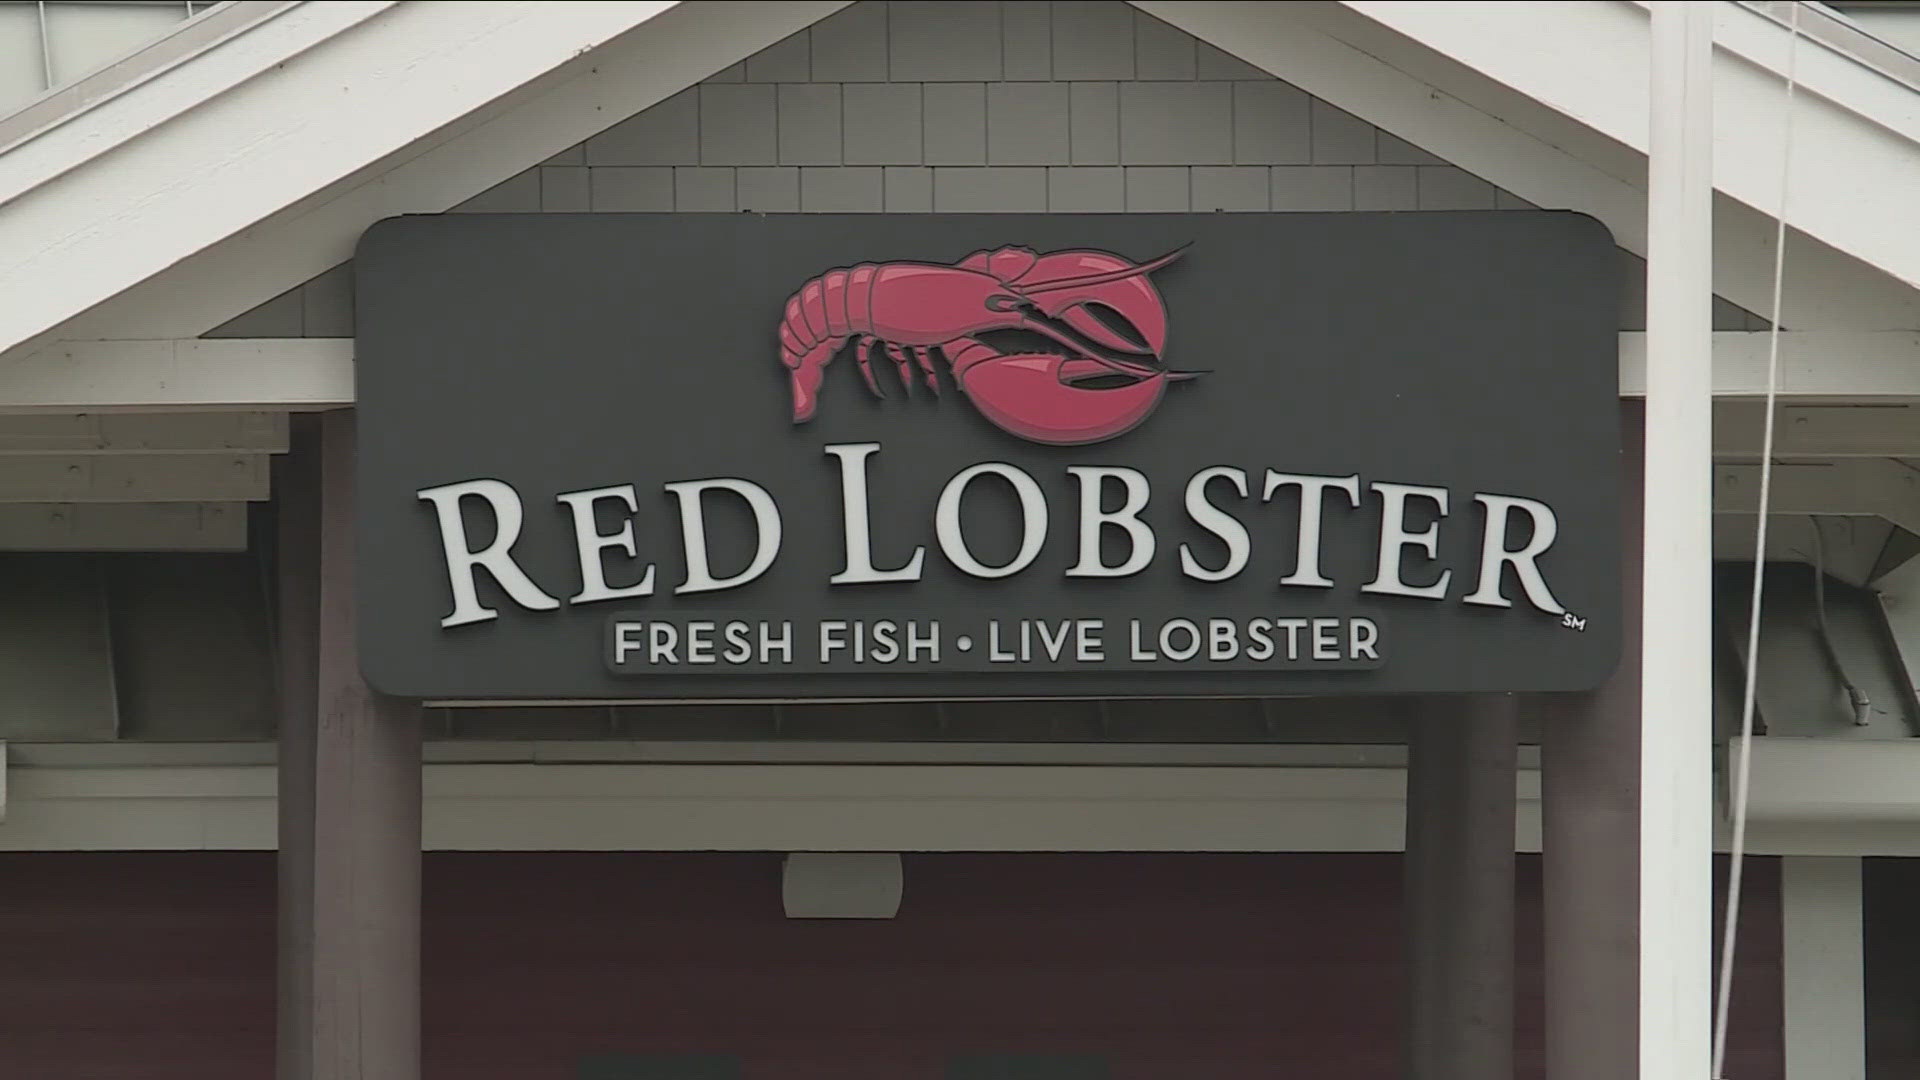 They are reaching out to offer jobs for those who lost theirs when the seafood restaurant chain abruptly shut down.